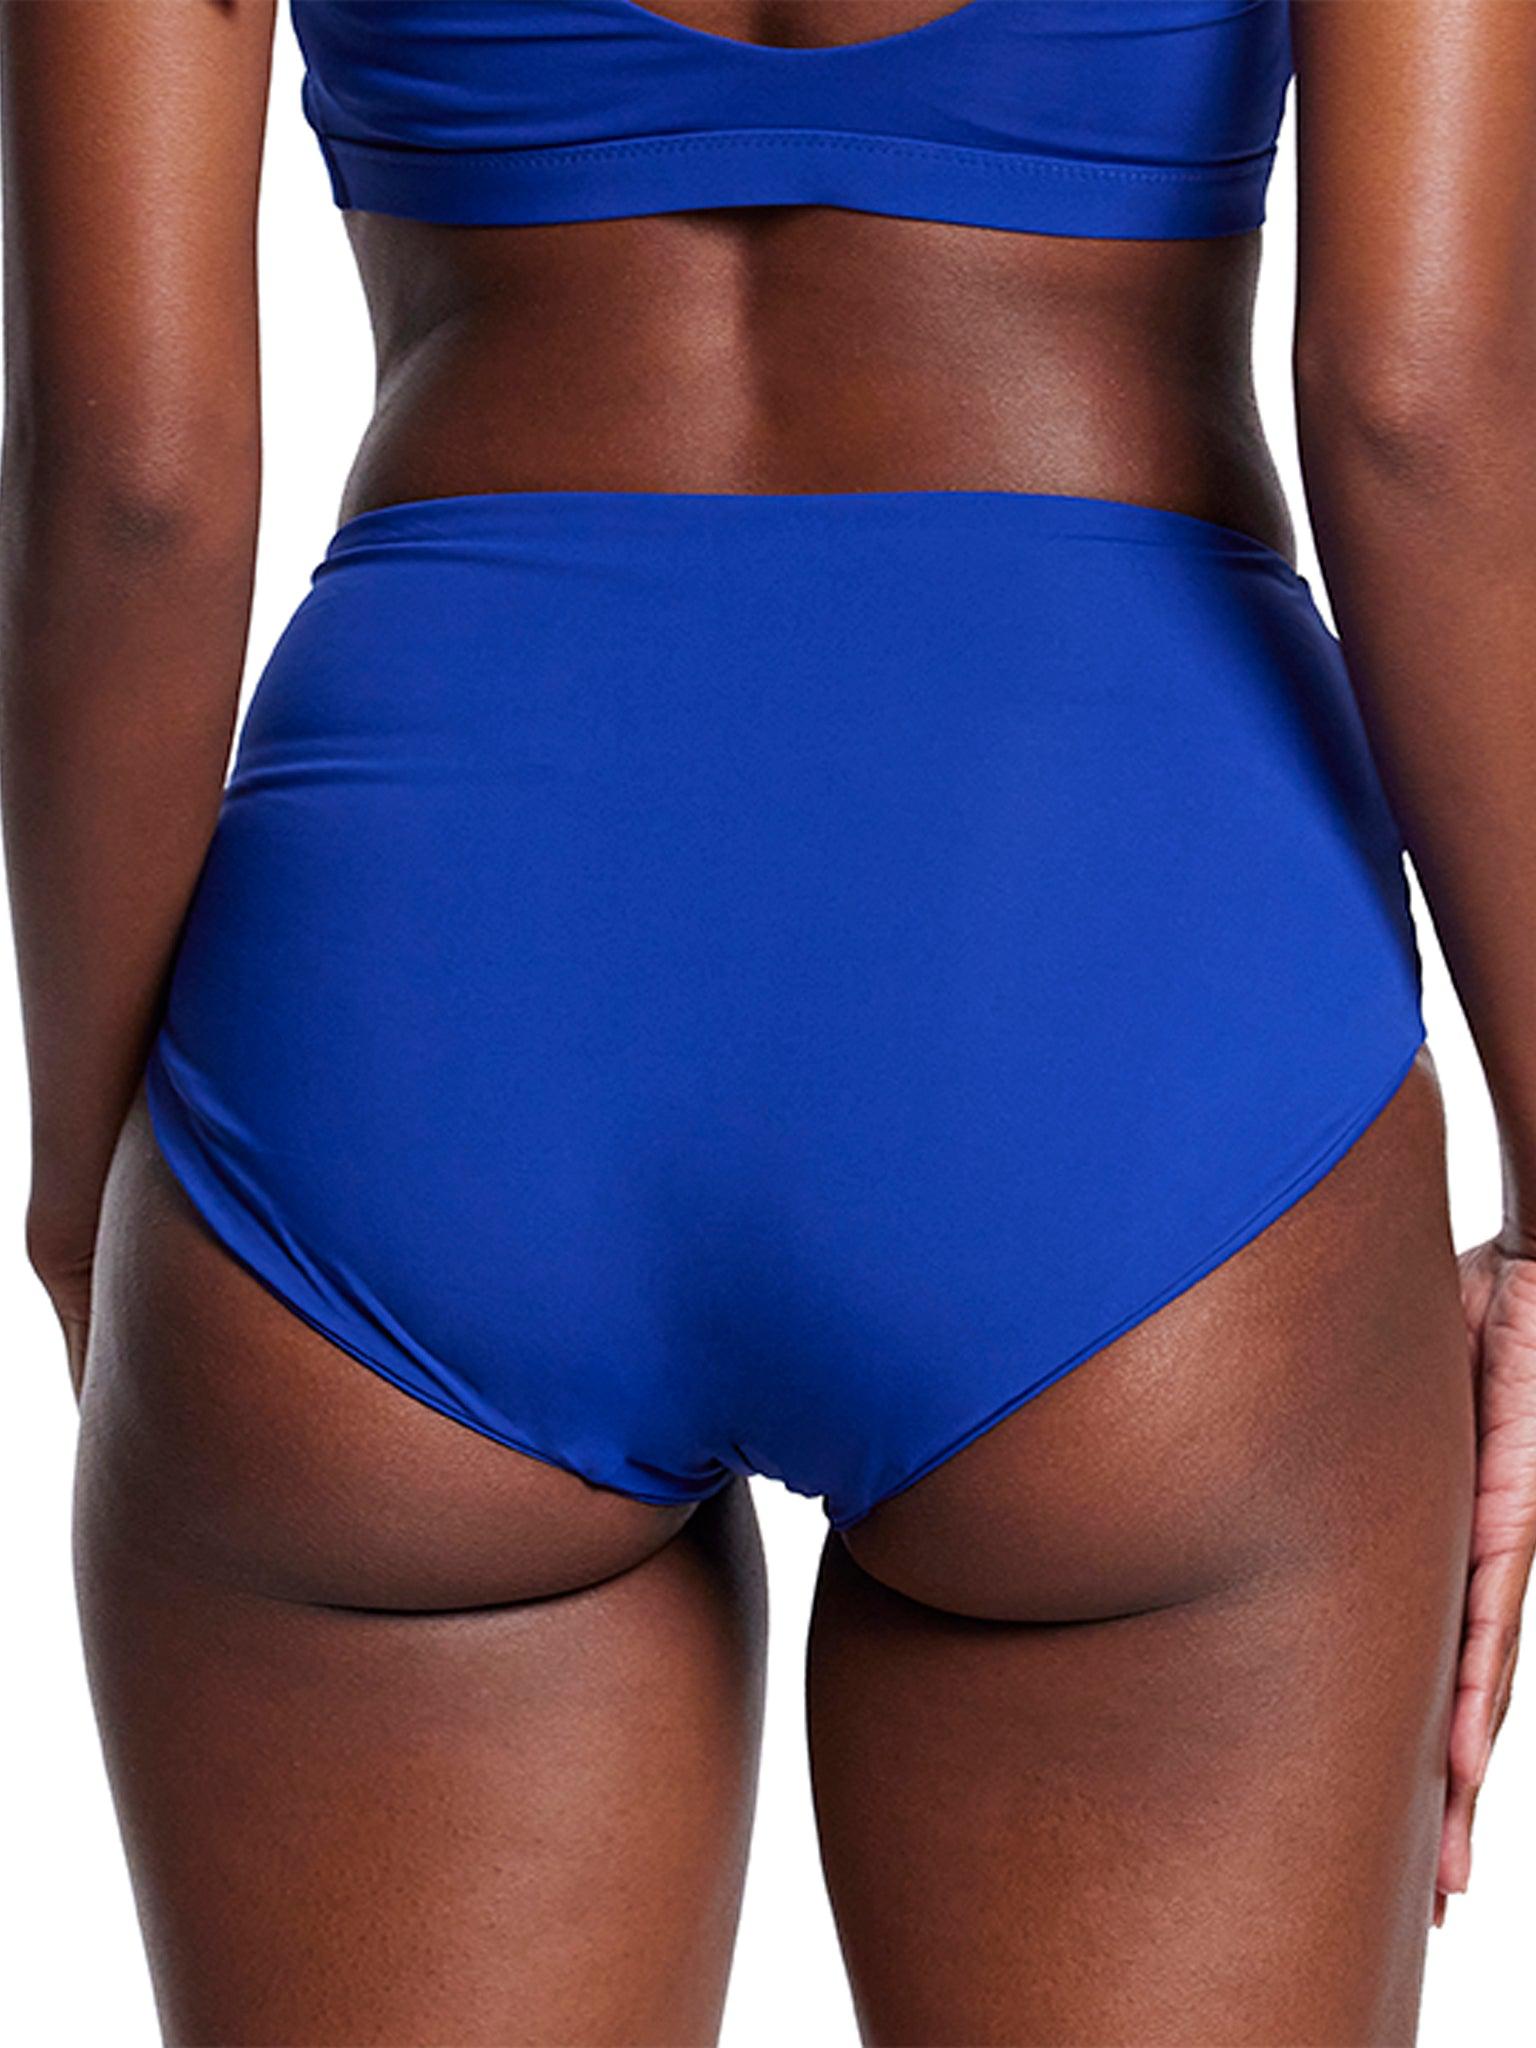 French Brief Swimsuit Bottom Poolside Blue